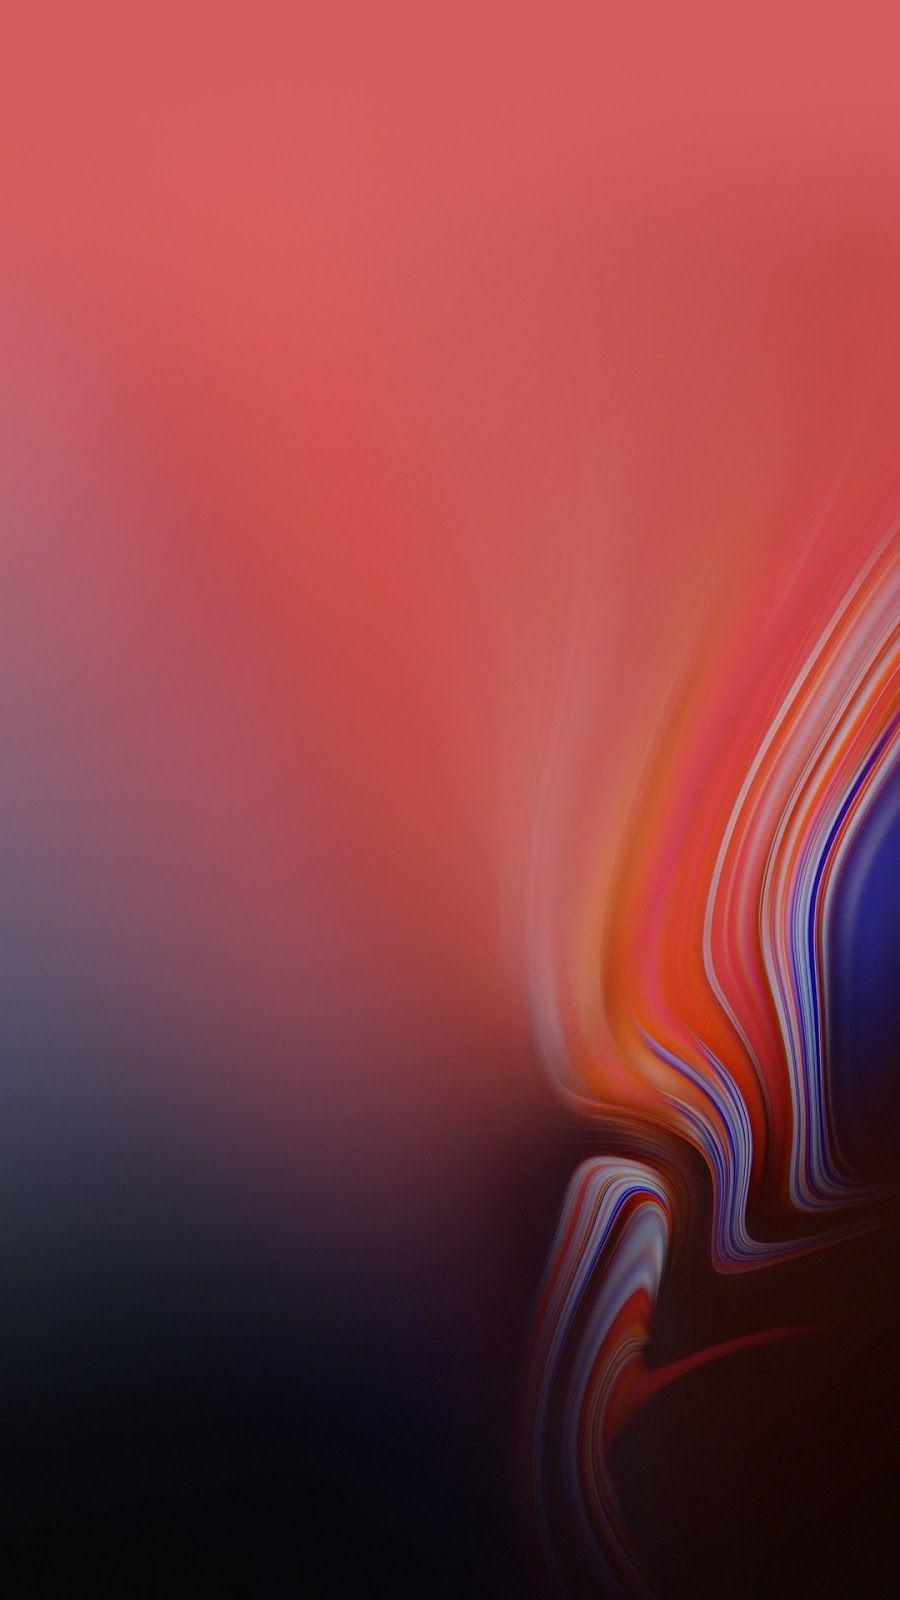 Samsung Galaxy Note 9 official Wallpaper For Redmi Note 4 & Other